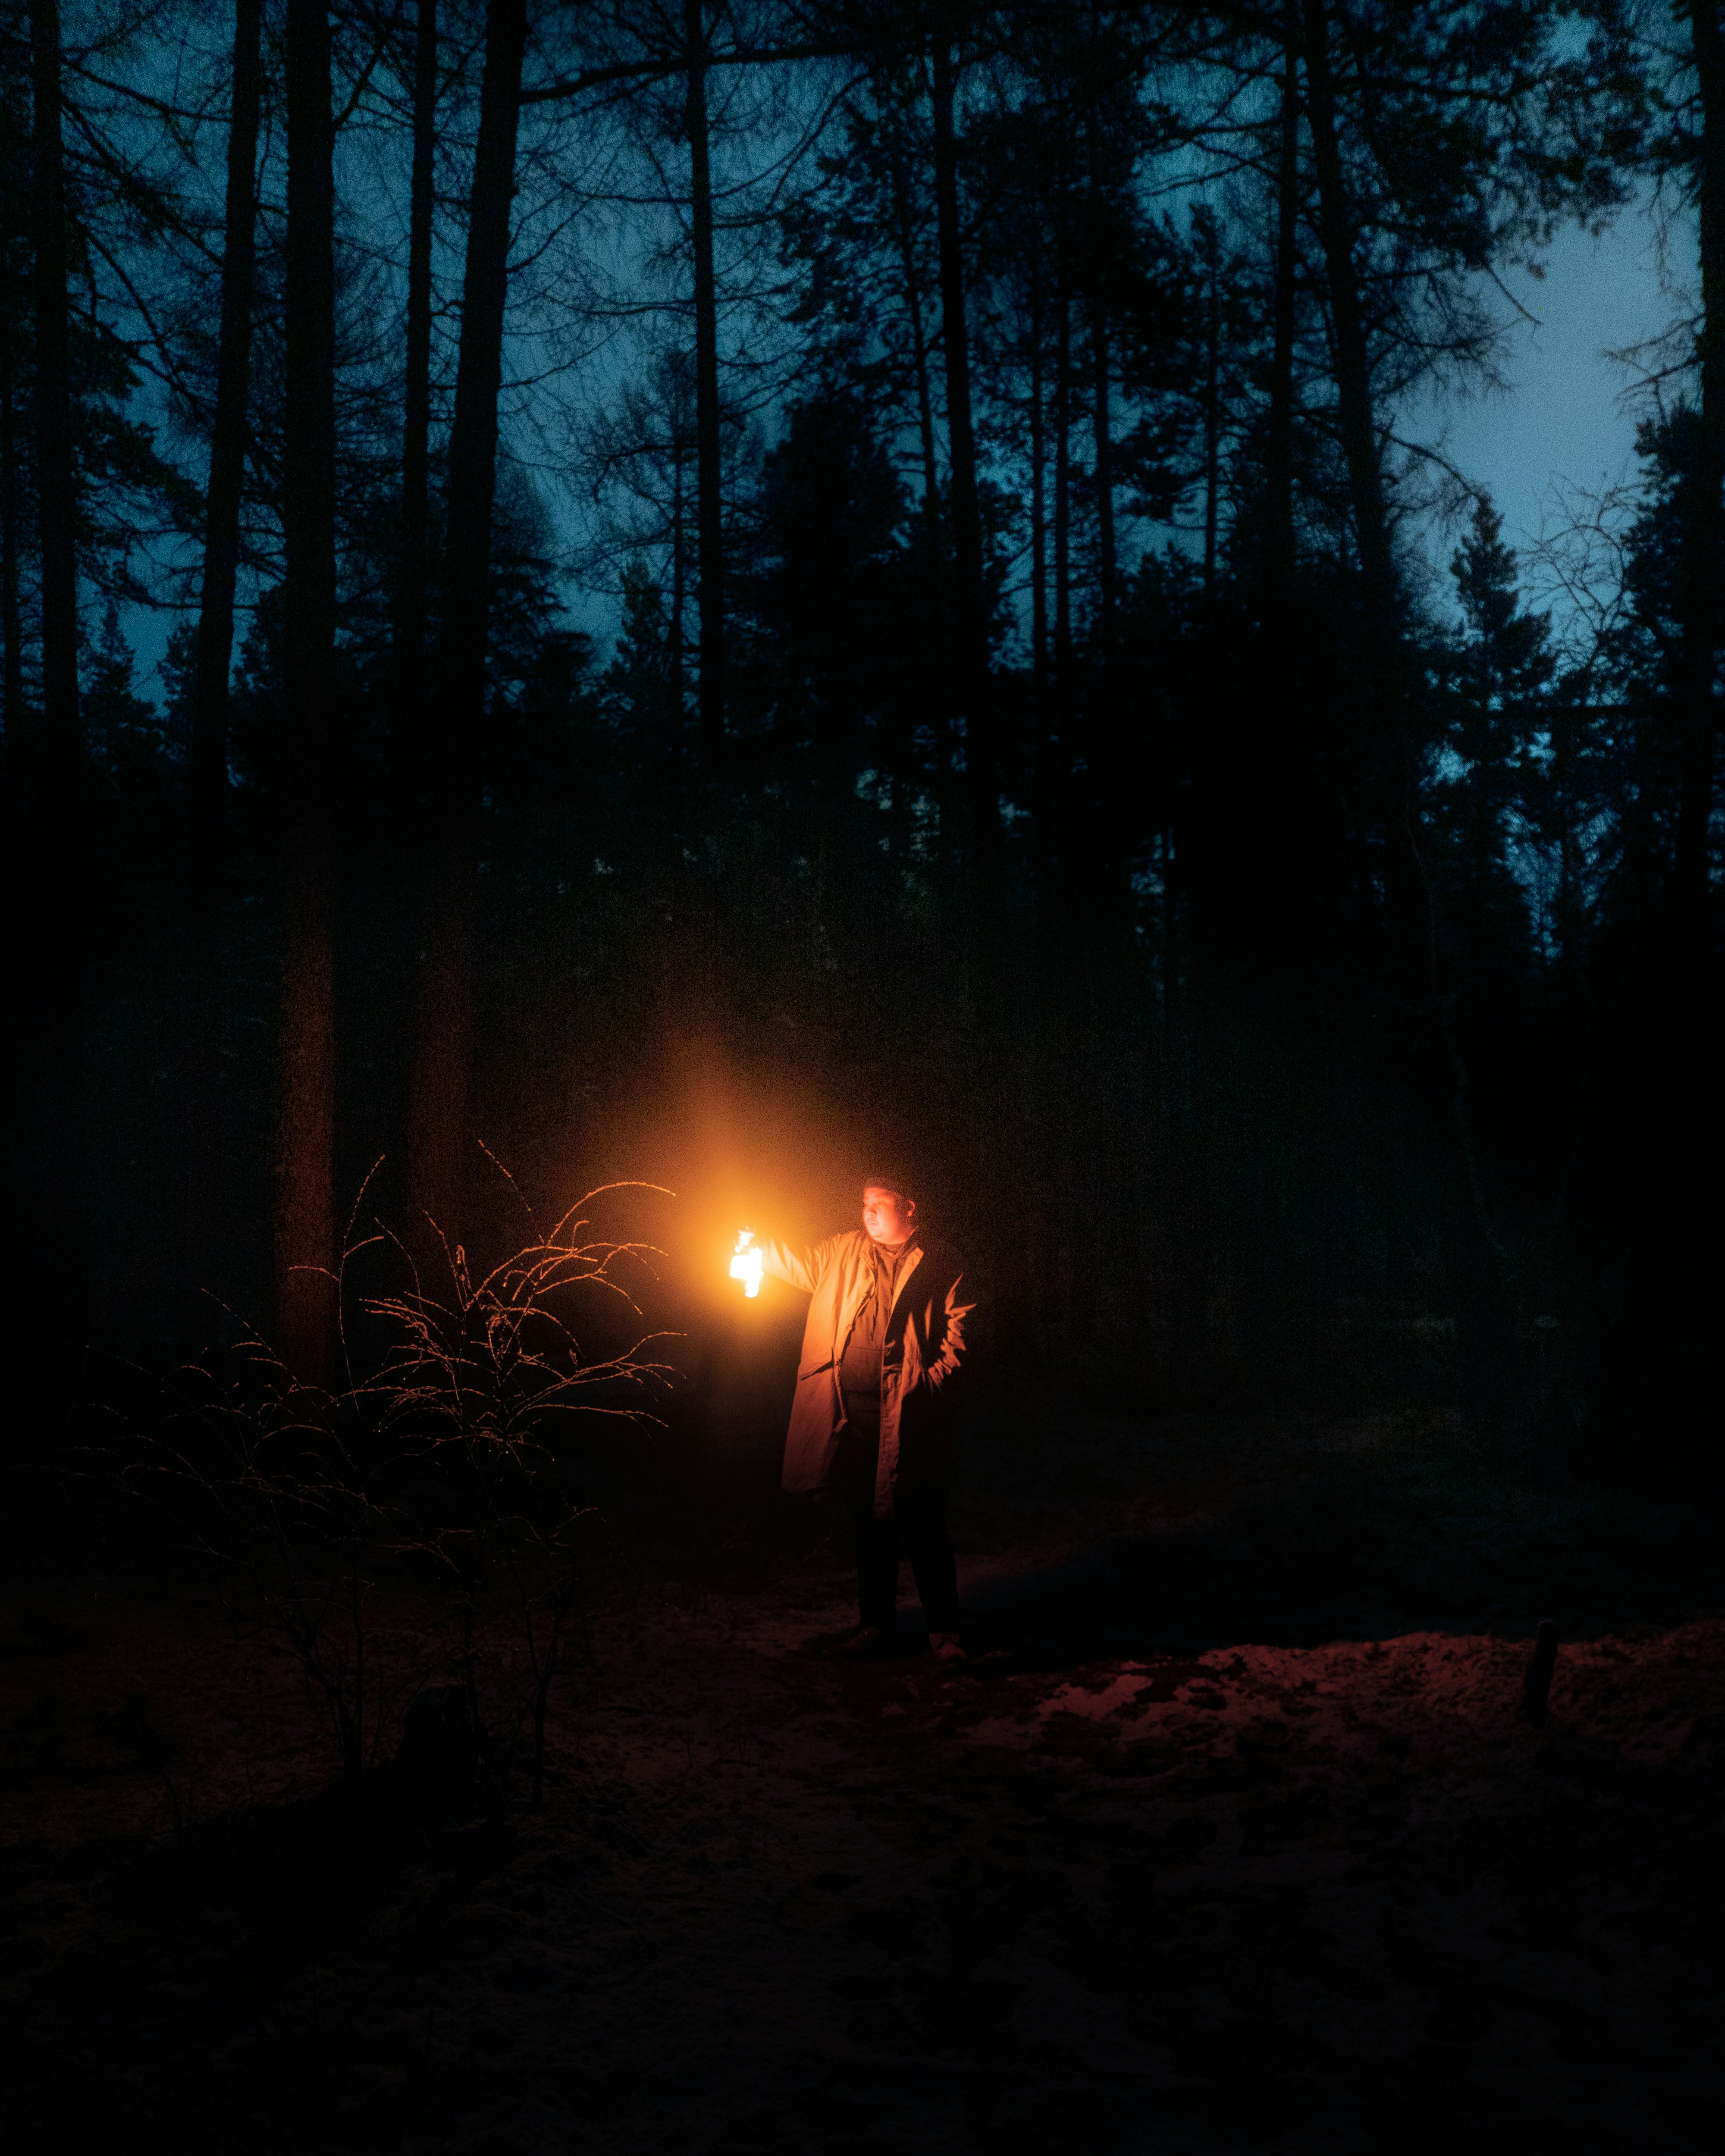 person in black jacket standing in forest during night time